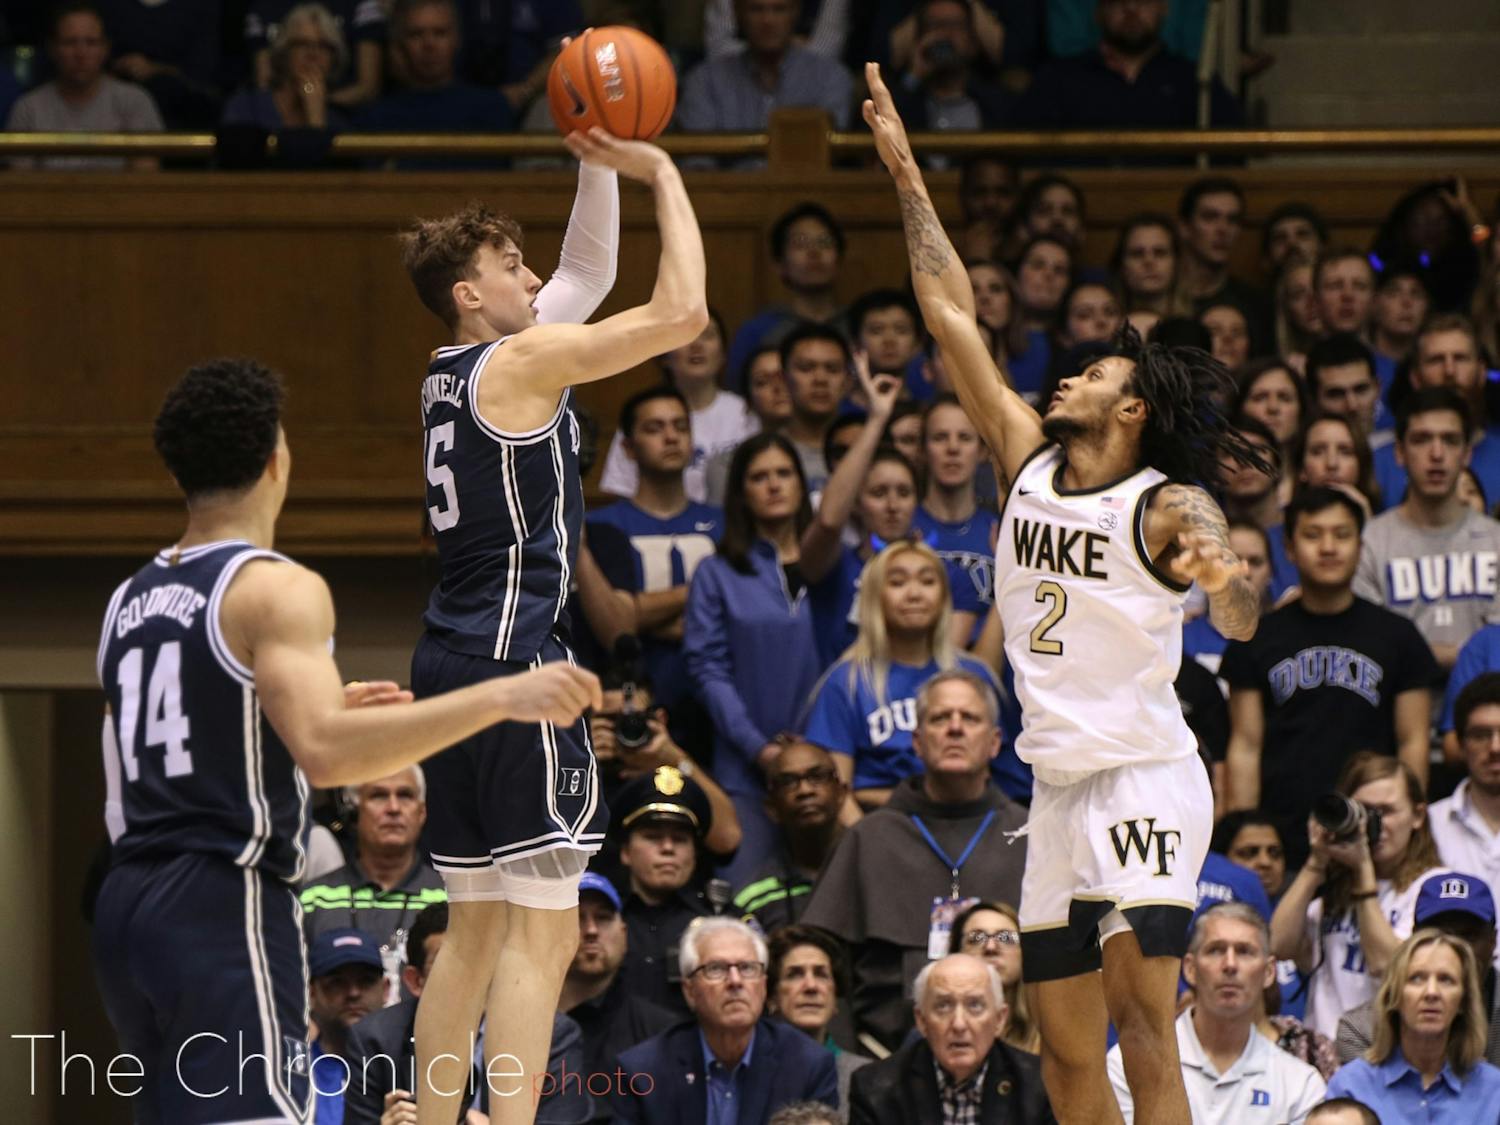 The Blue Devils will look to match their offensive dominance against Wake Forest Tuesday.